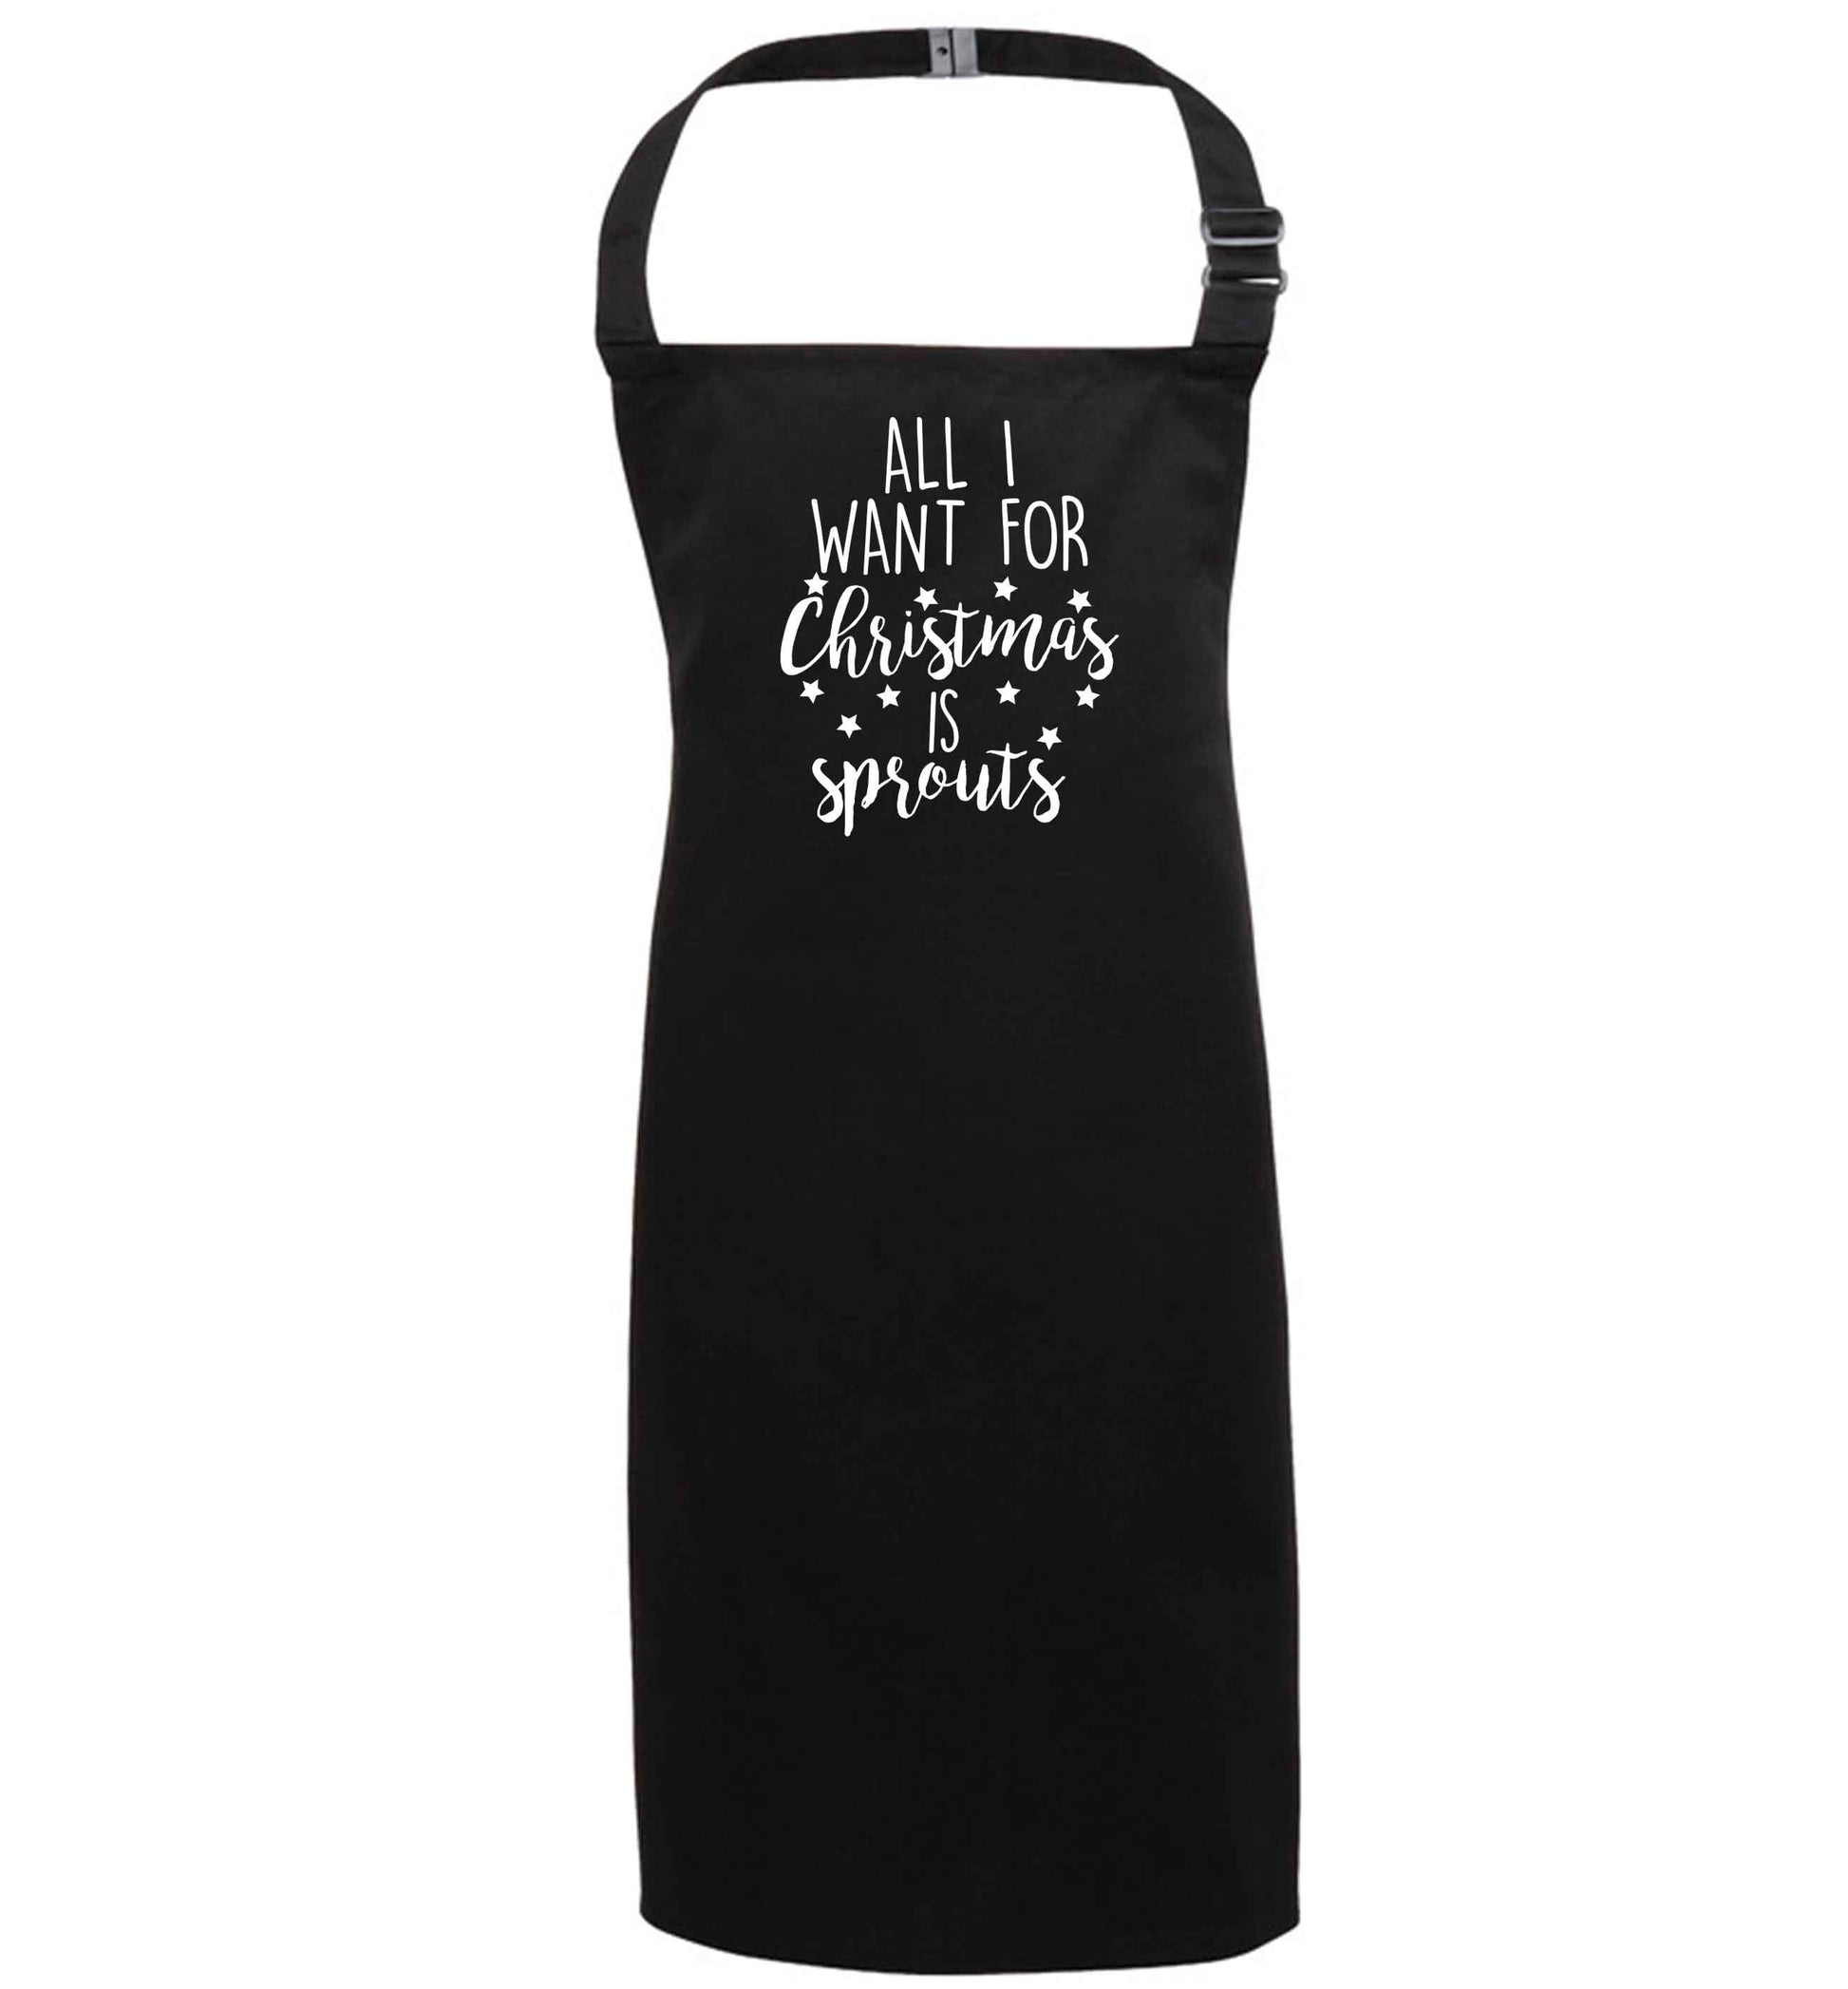 All I want for Christmas is sprouts black apron 7-10 years